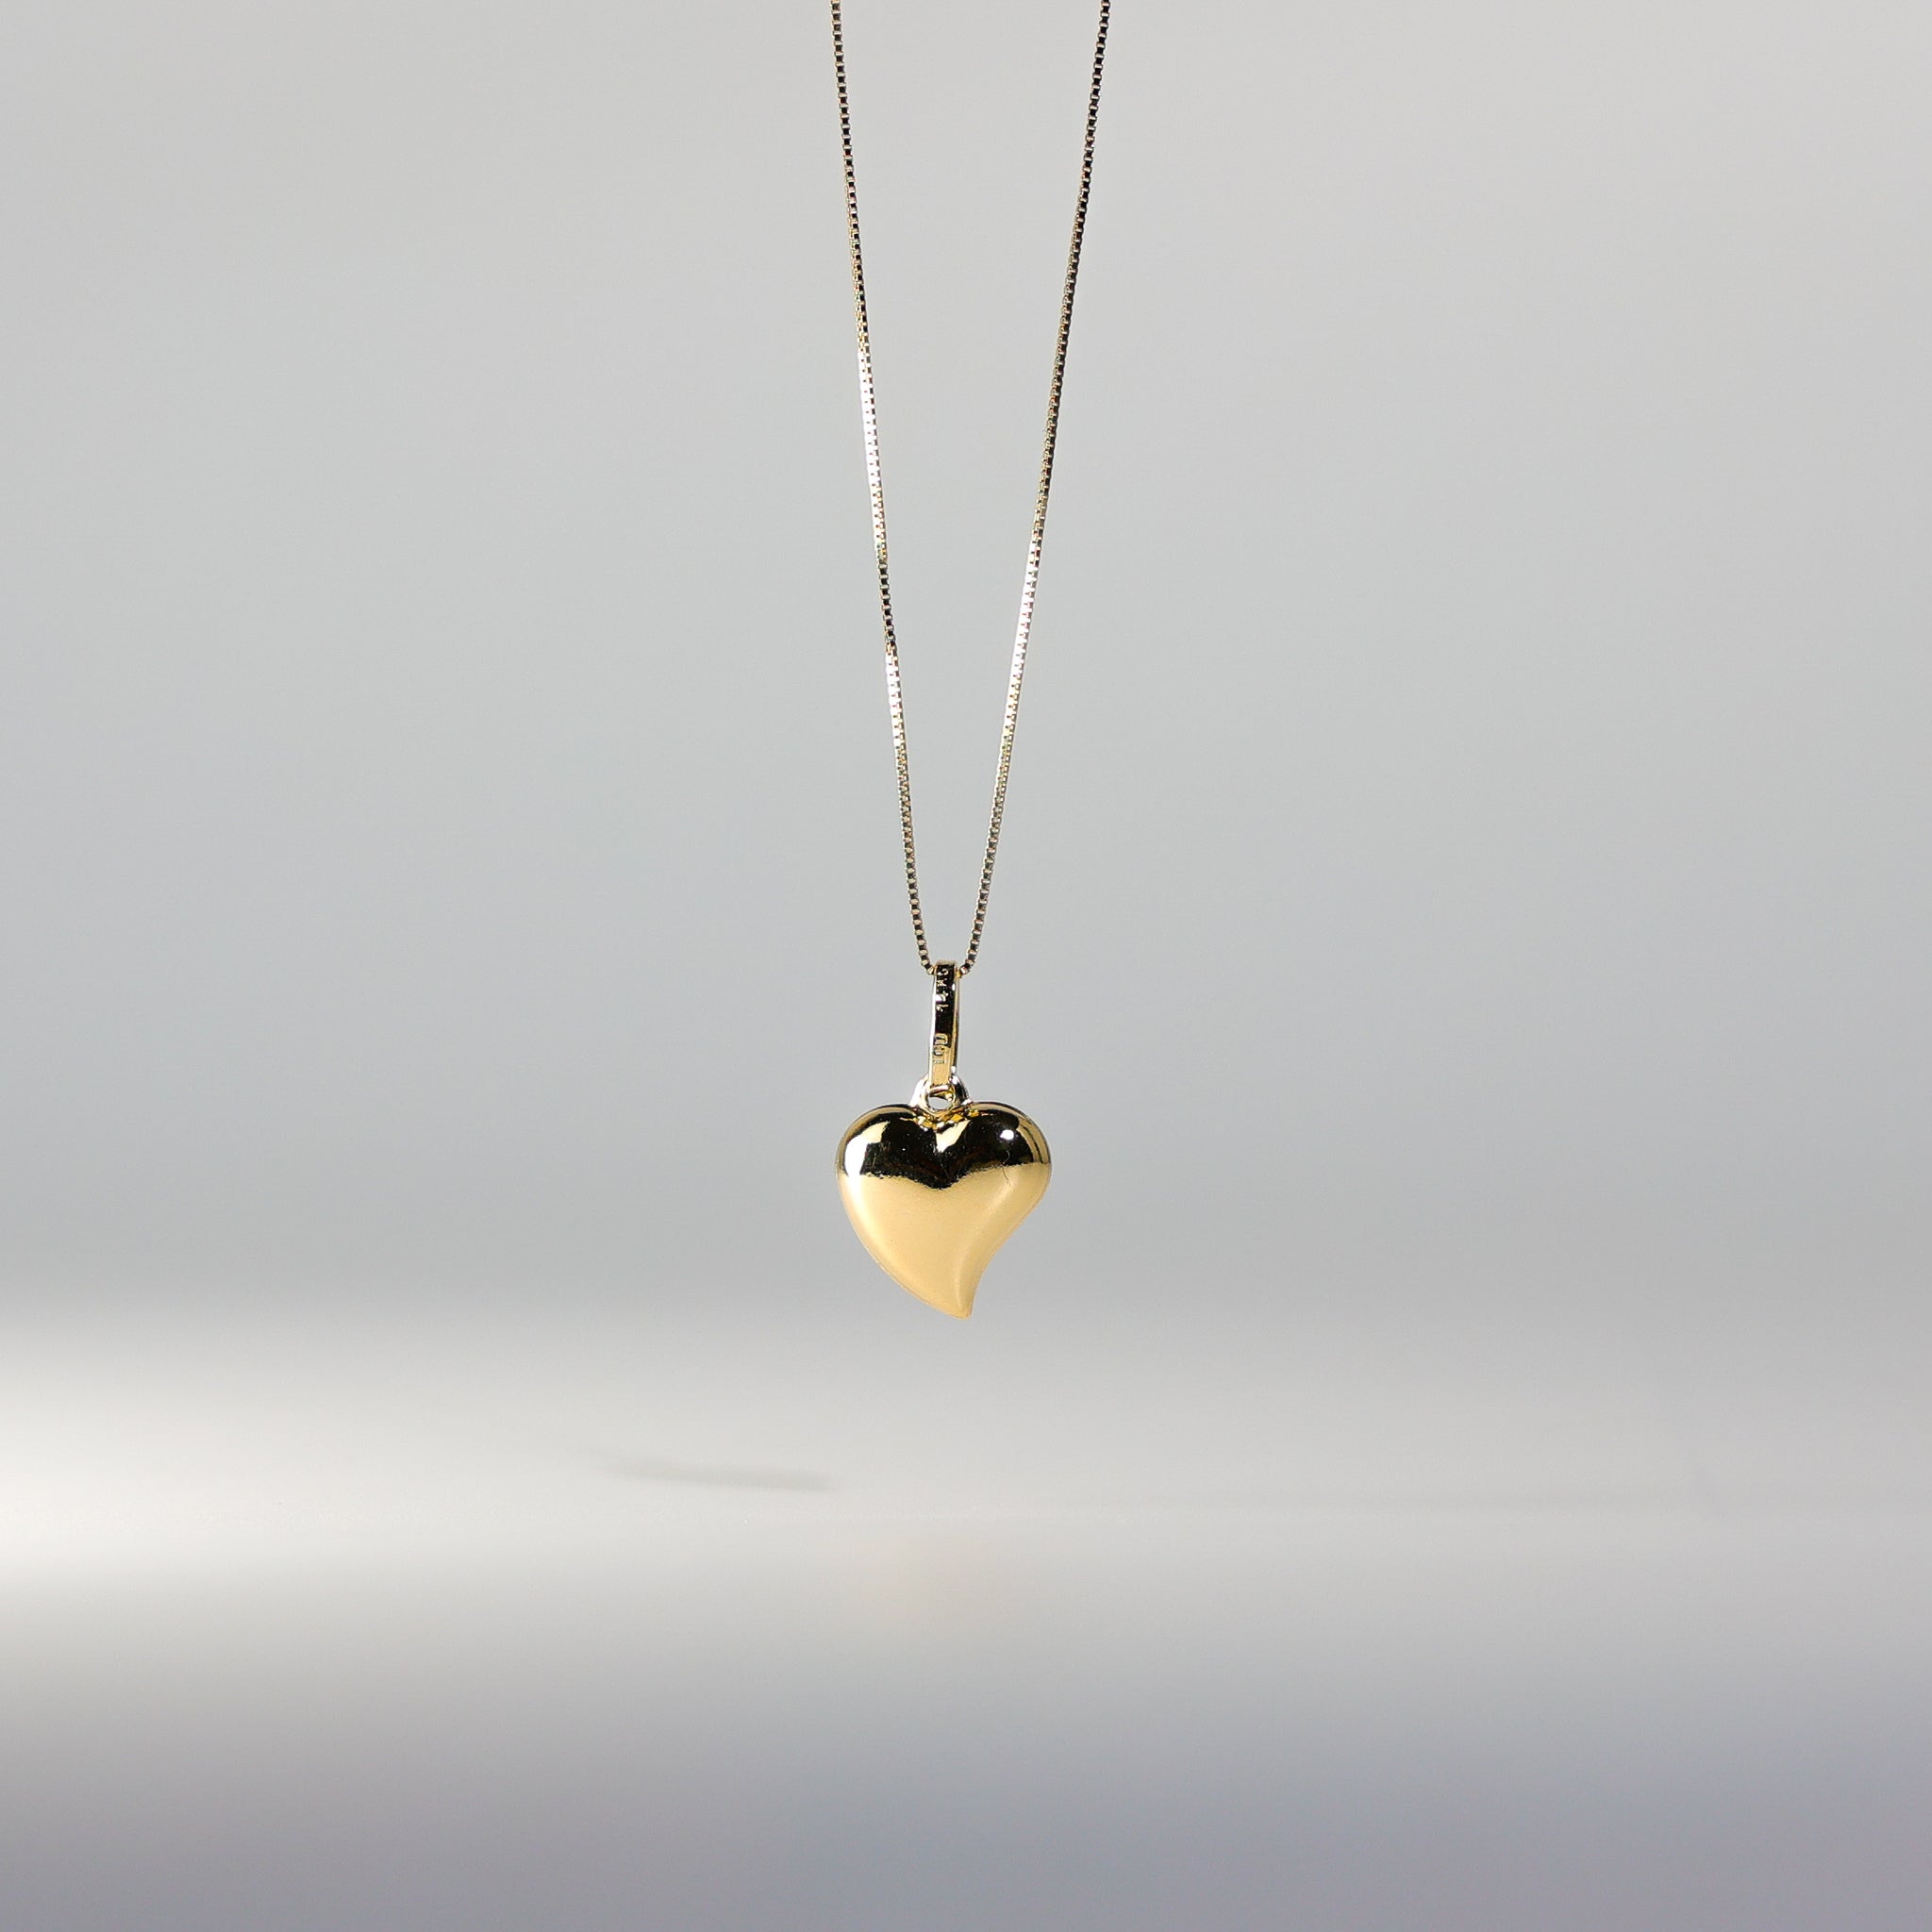 14k Gold Puffed Heart Pendant Model-449 - Charlie & Co. Jewelry